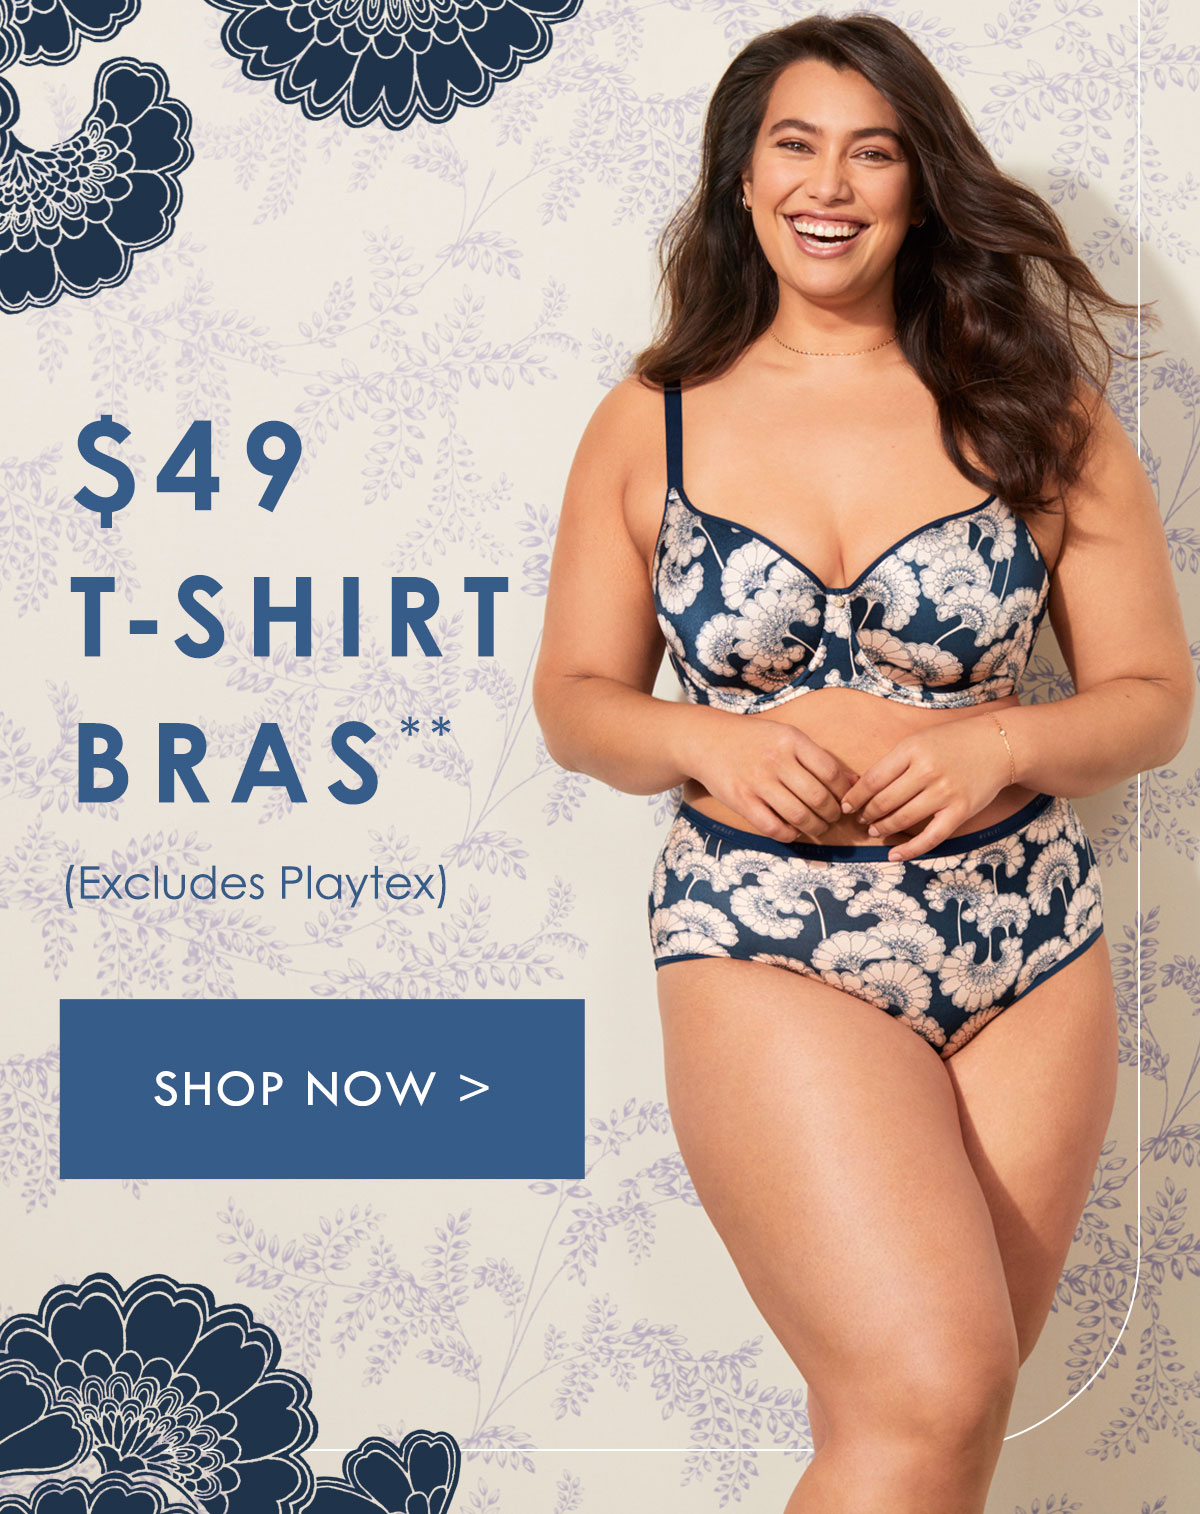 $49 T Shirt Bras. Excludes Playtex. Shop Now.